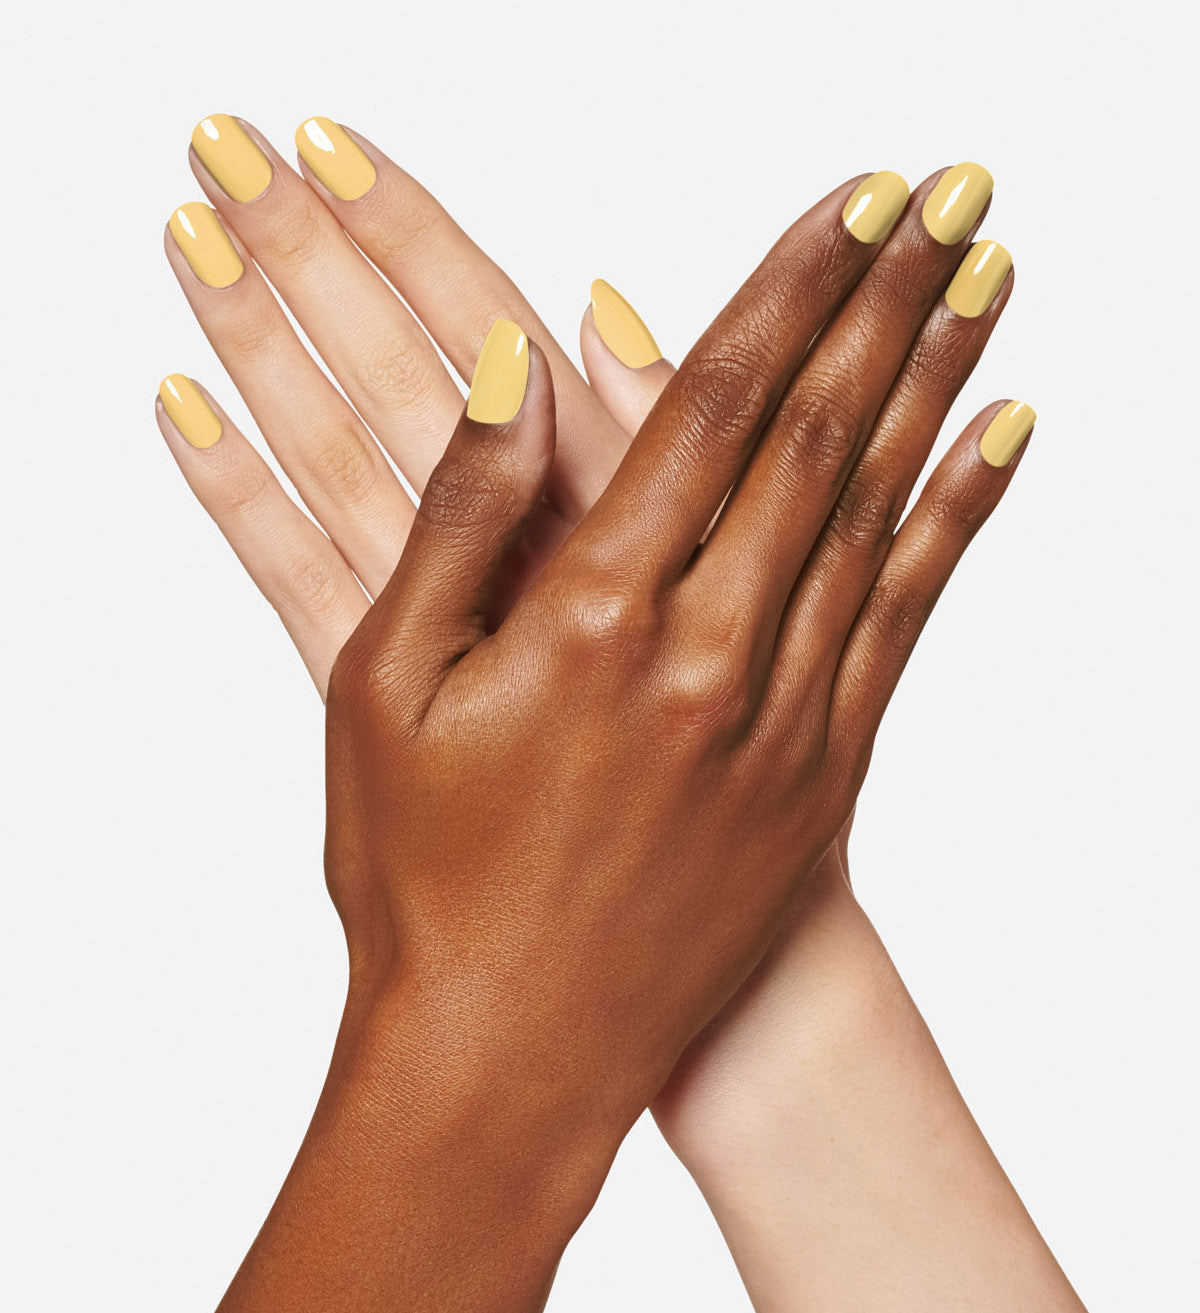 The Best Summer Nail Colors For 2021